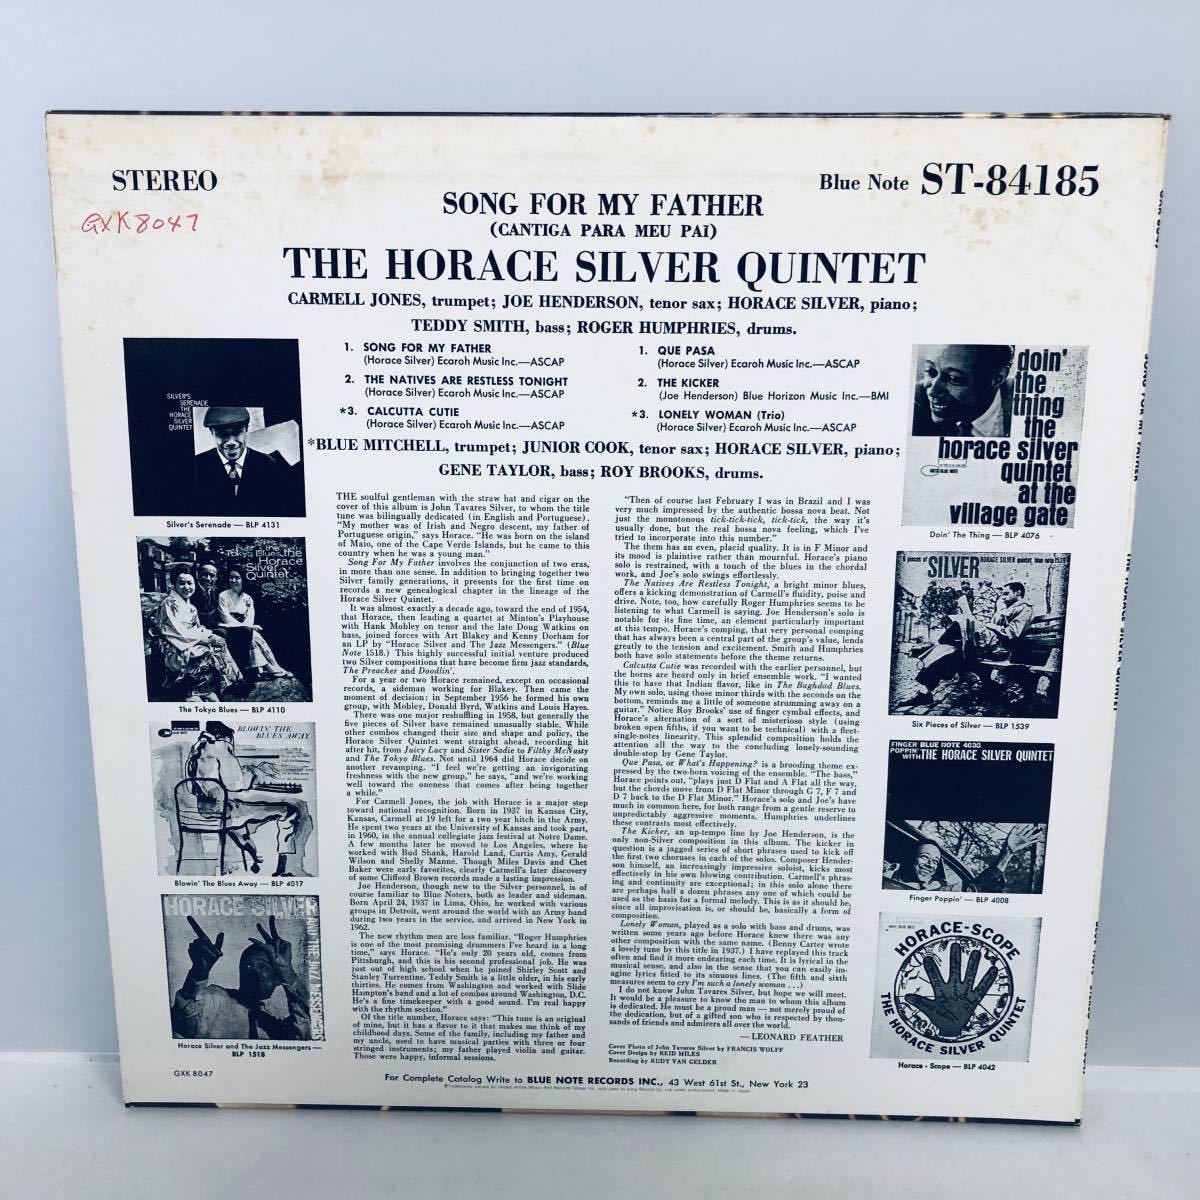 【LP】レコード 再生未確認 The Horace Silver Quintet/Song For My Father/Cantiga Para Meu Pai BST 84185 ※まとめ買い大歓迎!同梱可能の画像2